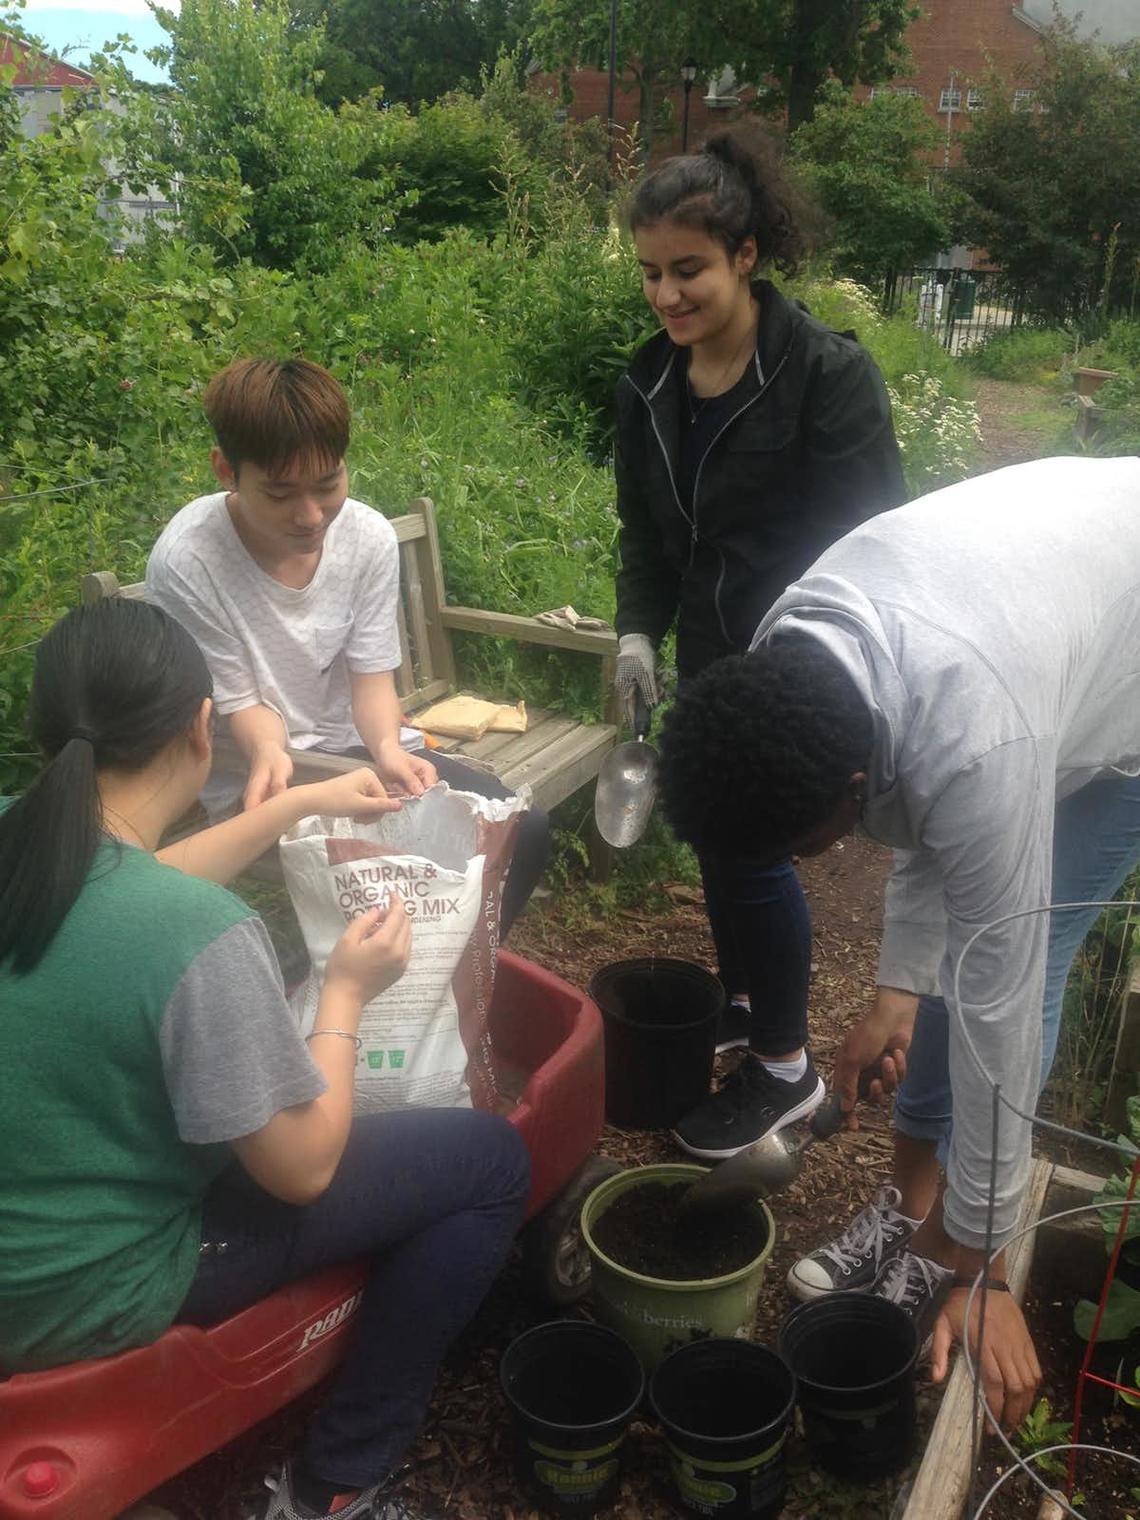 Community Roots students planting seeds in a Brooklyn public school garden.